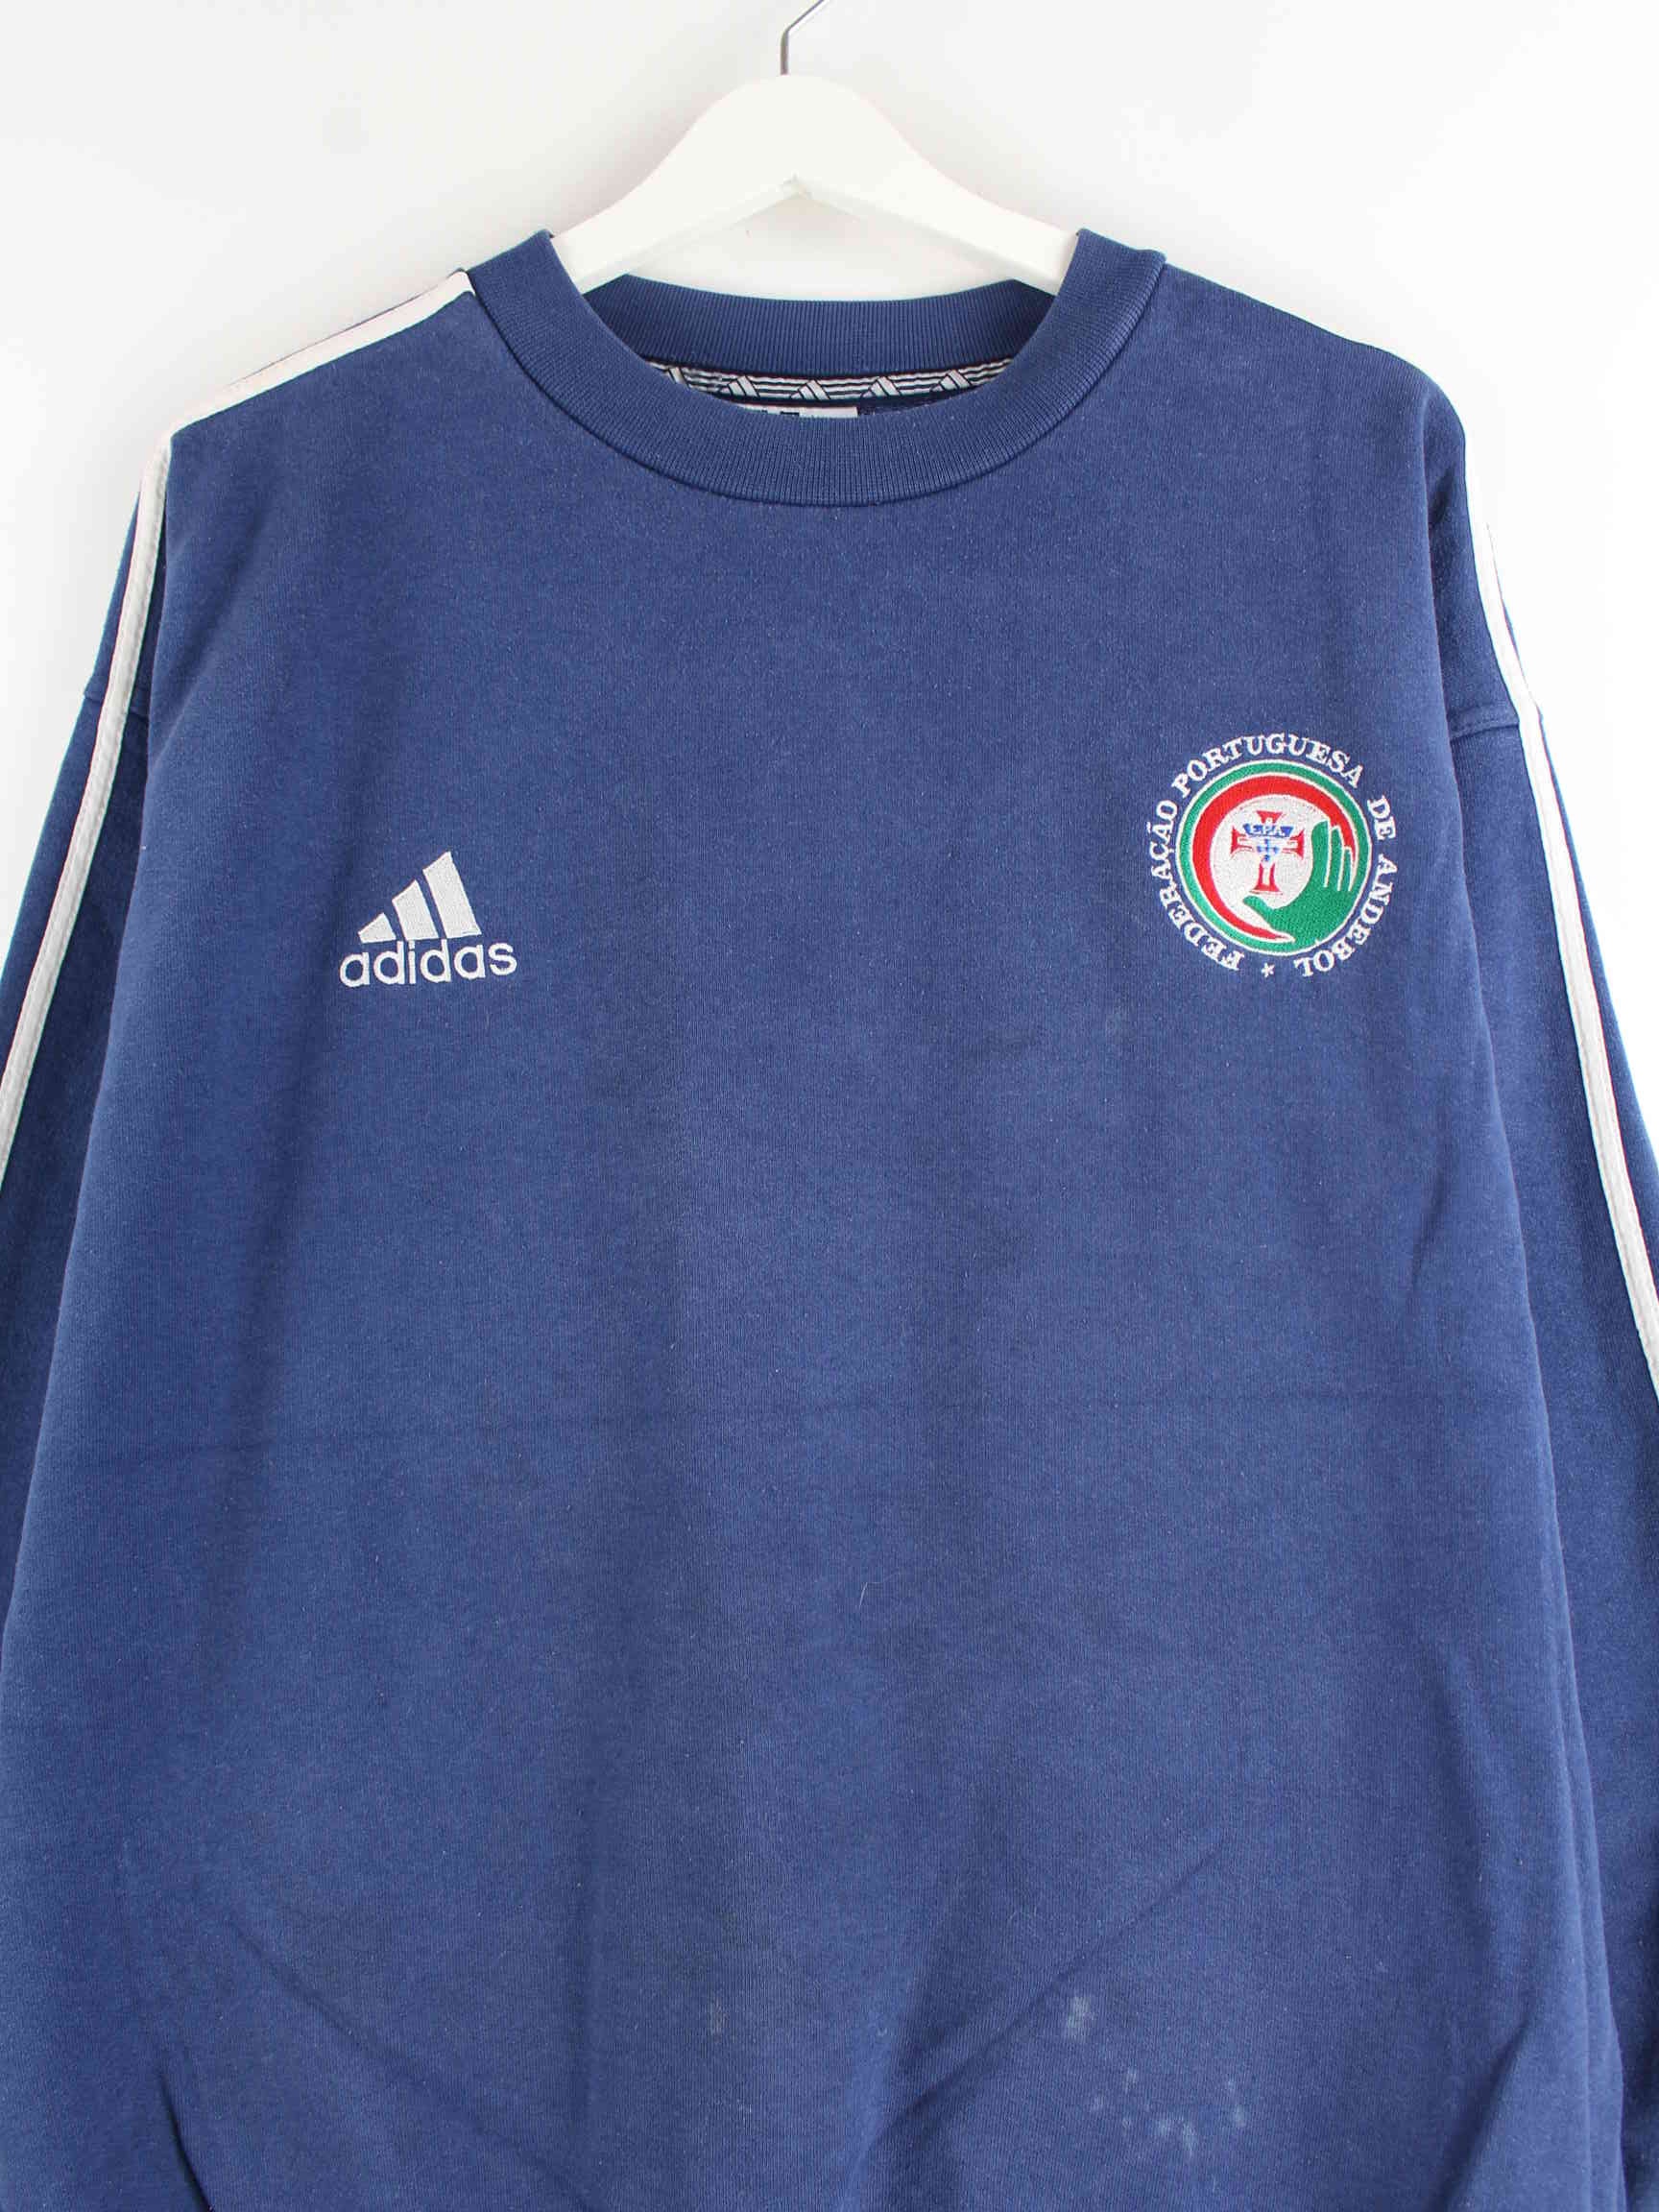 Adidas 80s Vintage Portugal Embroidered Sweater Blau XL (detail image 1)